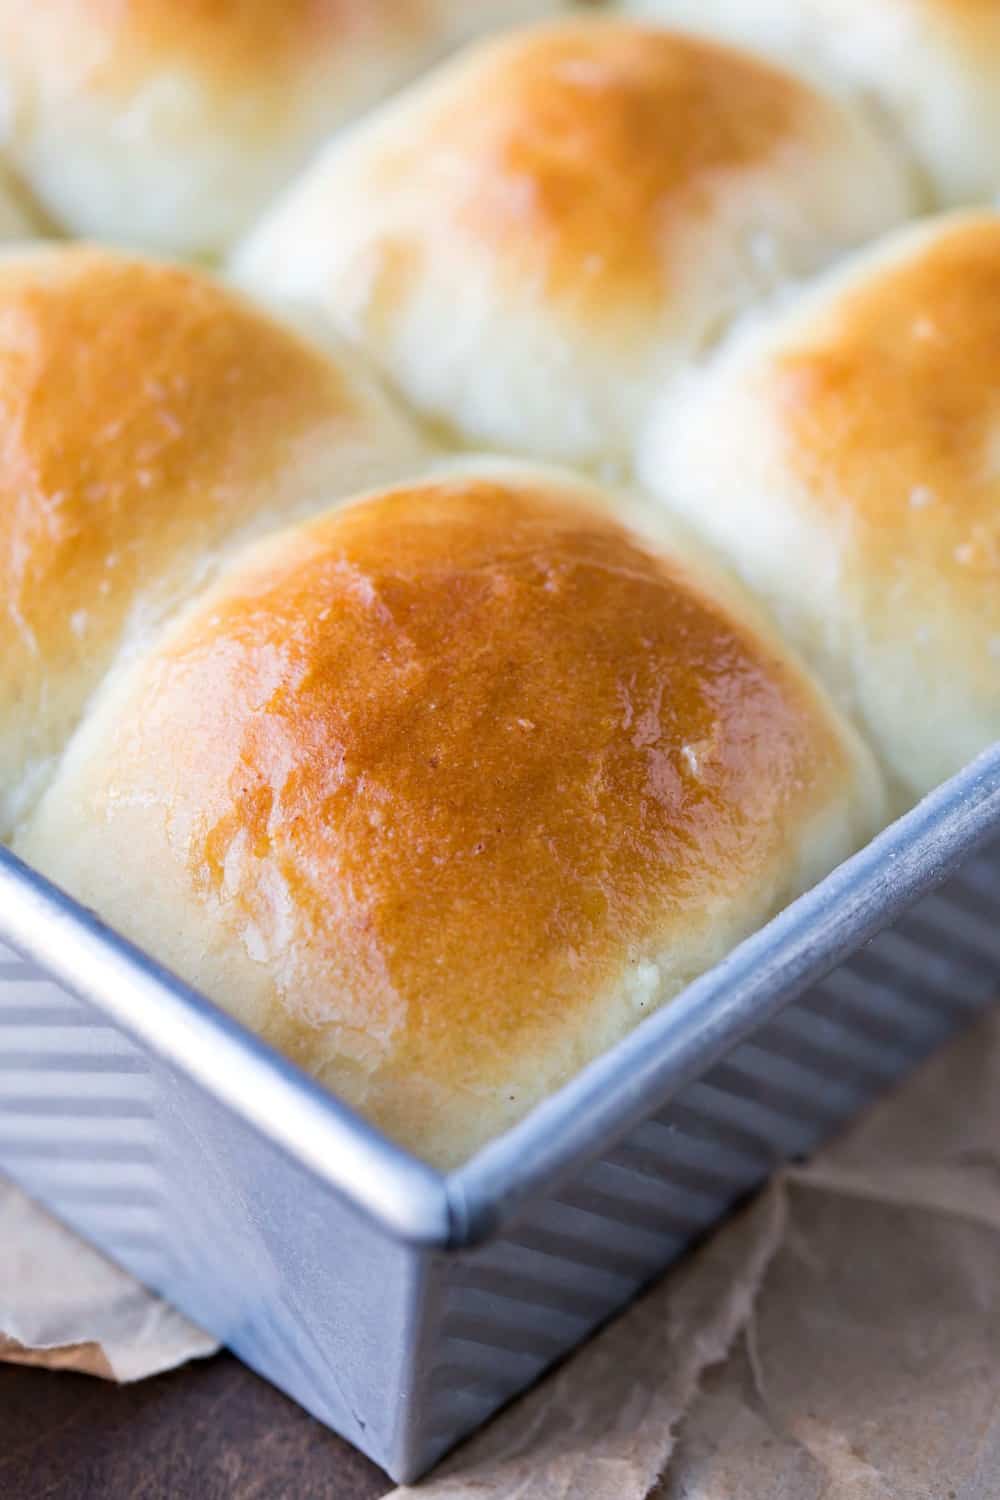 Closeup photo of an Amish dinner roll.